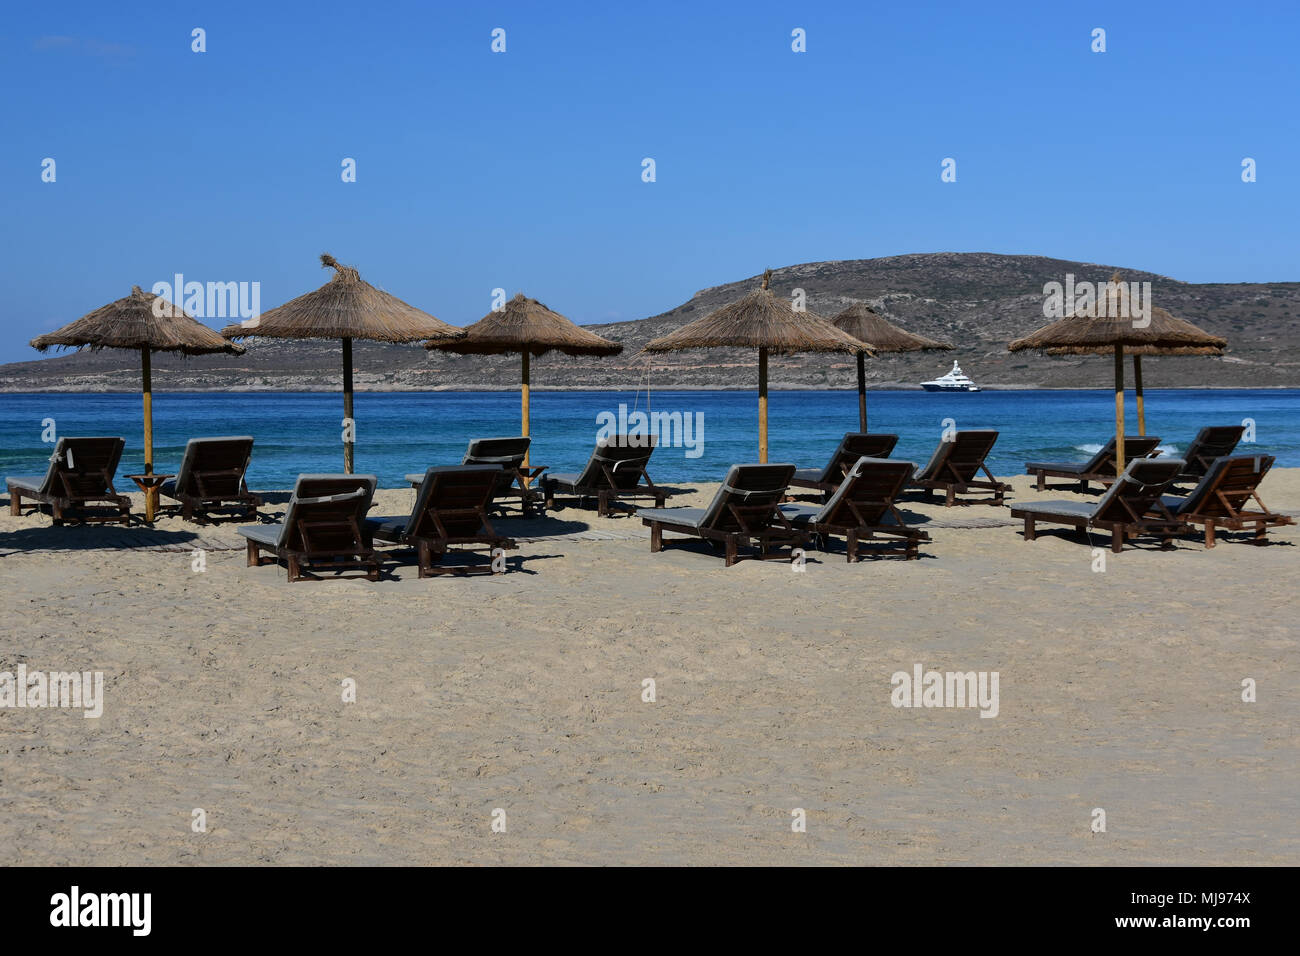 Wide sandy beach with old umbrellas and empty chaise longue, quiet turquoise sea, white yacht far away in the bay, serene blue sky Stock Photo